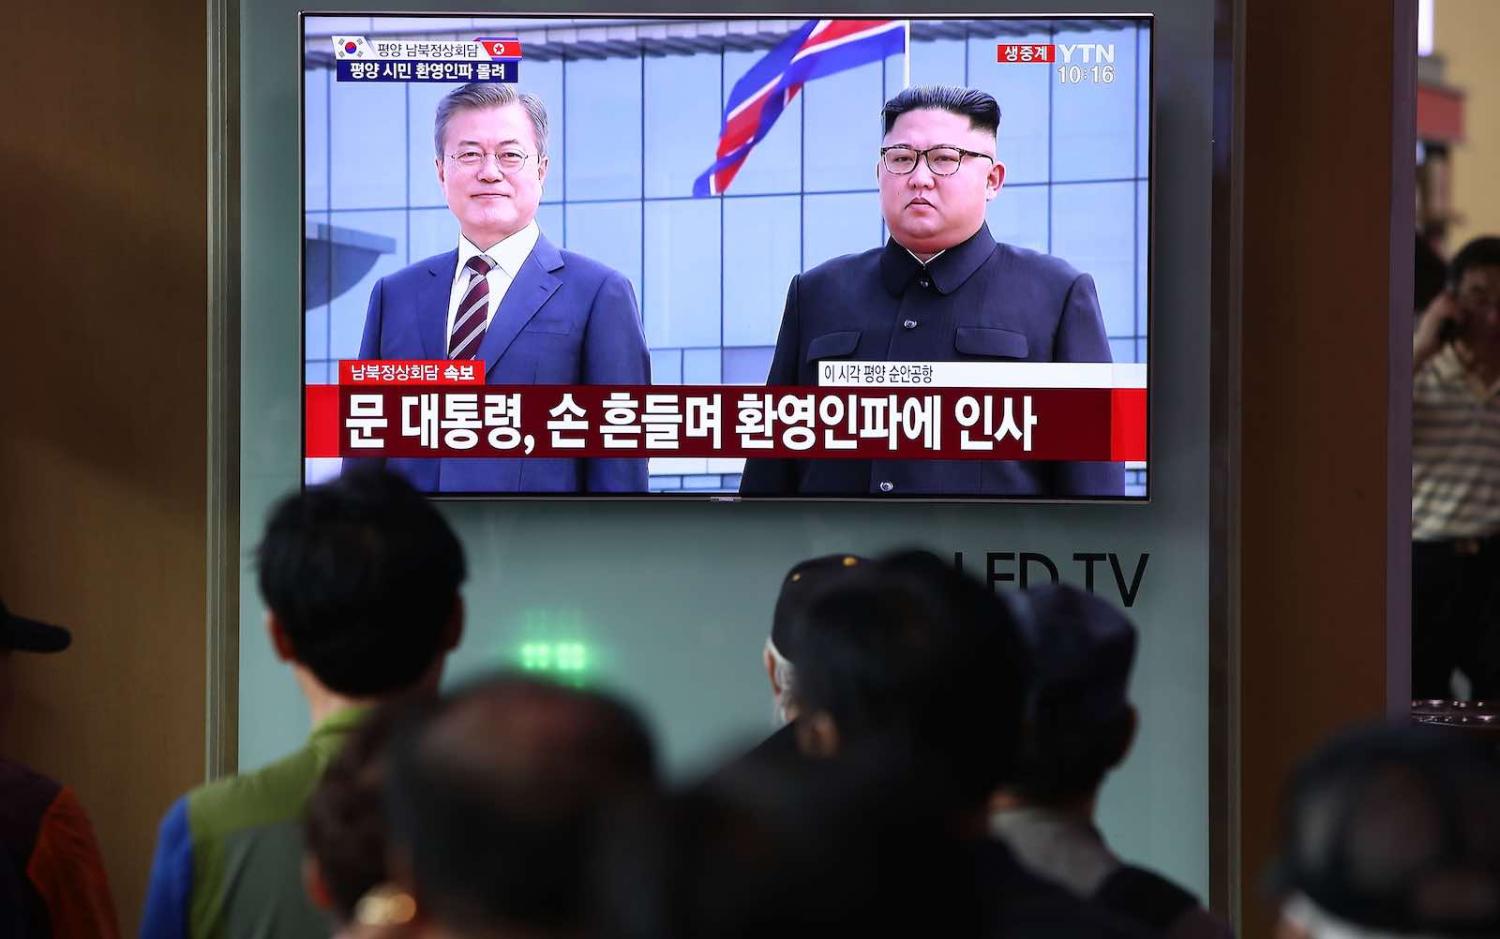 South Koreans watch a television broadcast reporting President Moon Jae-in meeting with North Korea’s Kim Jong-un on 18 September (Photo: Chung Sung-Jun/Getty) 